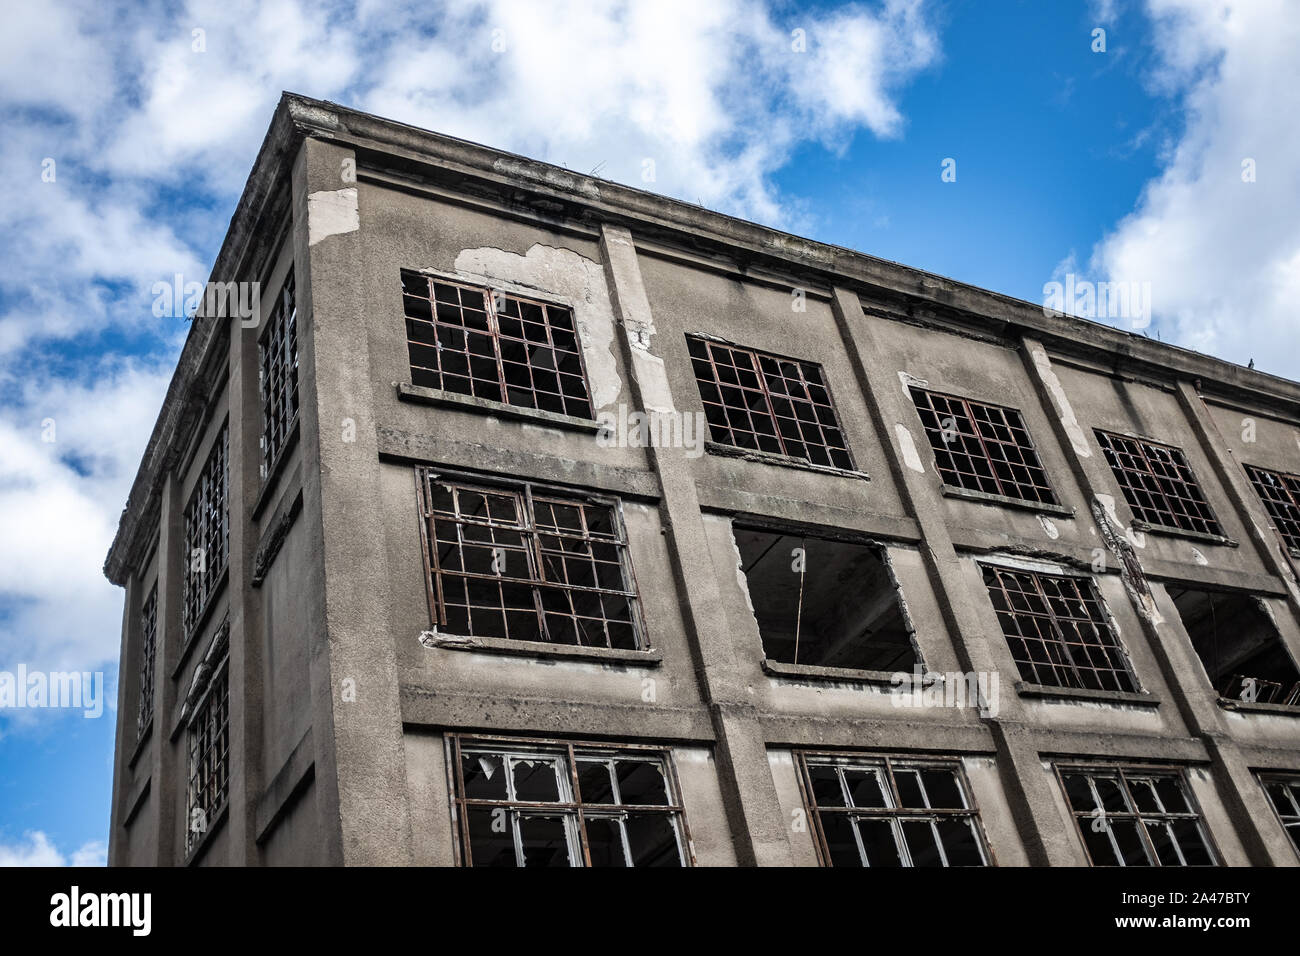 Recession Image Of A Derelict Factory Against A Blue Sky Stock Photo